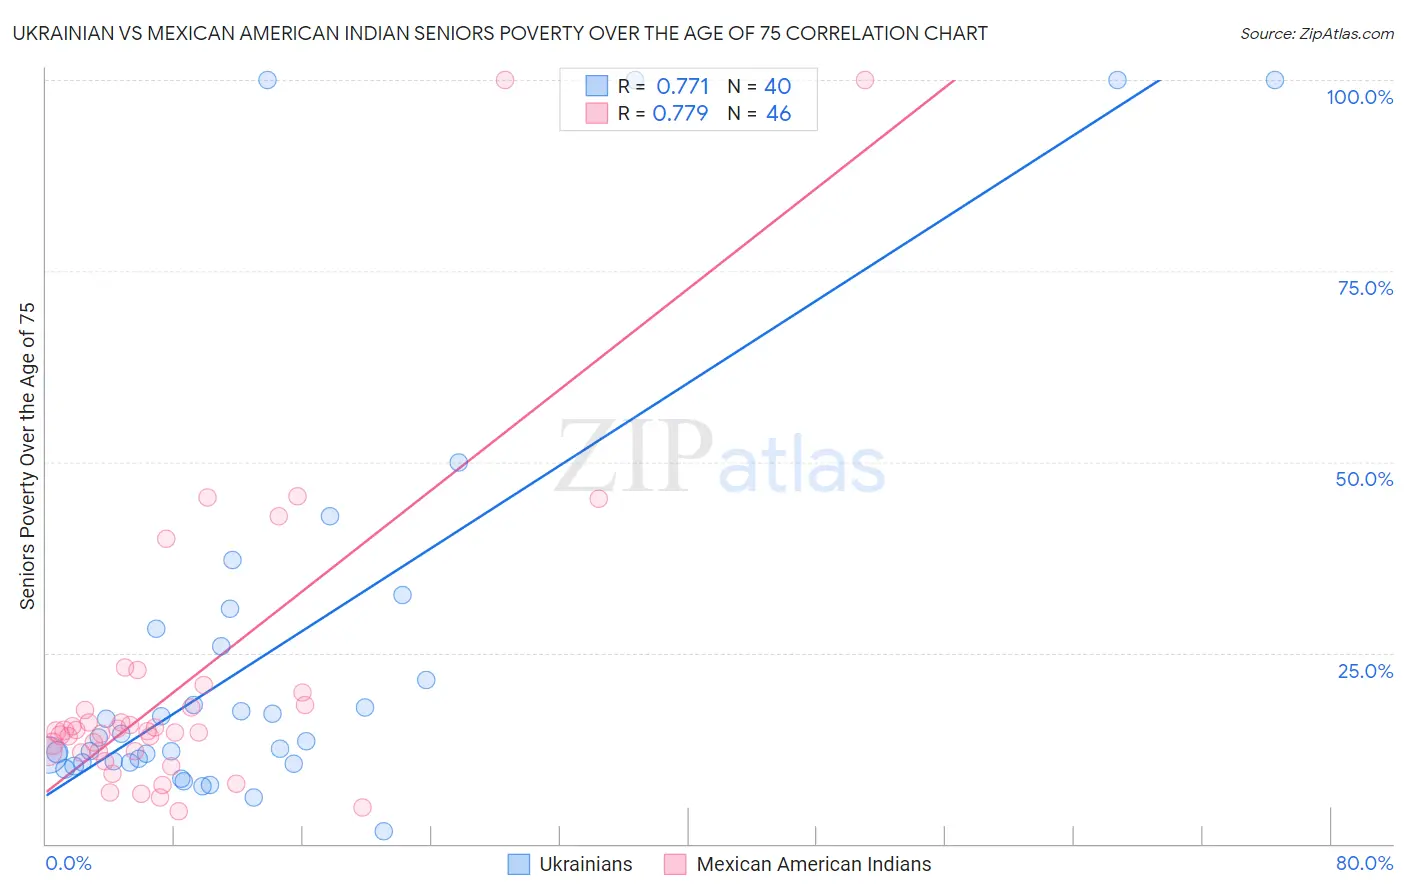 Ukrainian vs Mexican American Indian Seniors Poverty Over the Age of 75